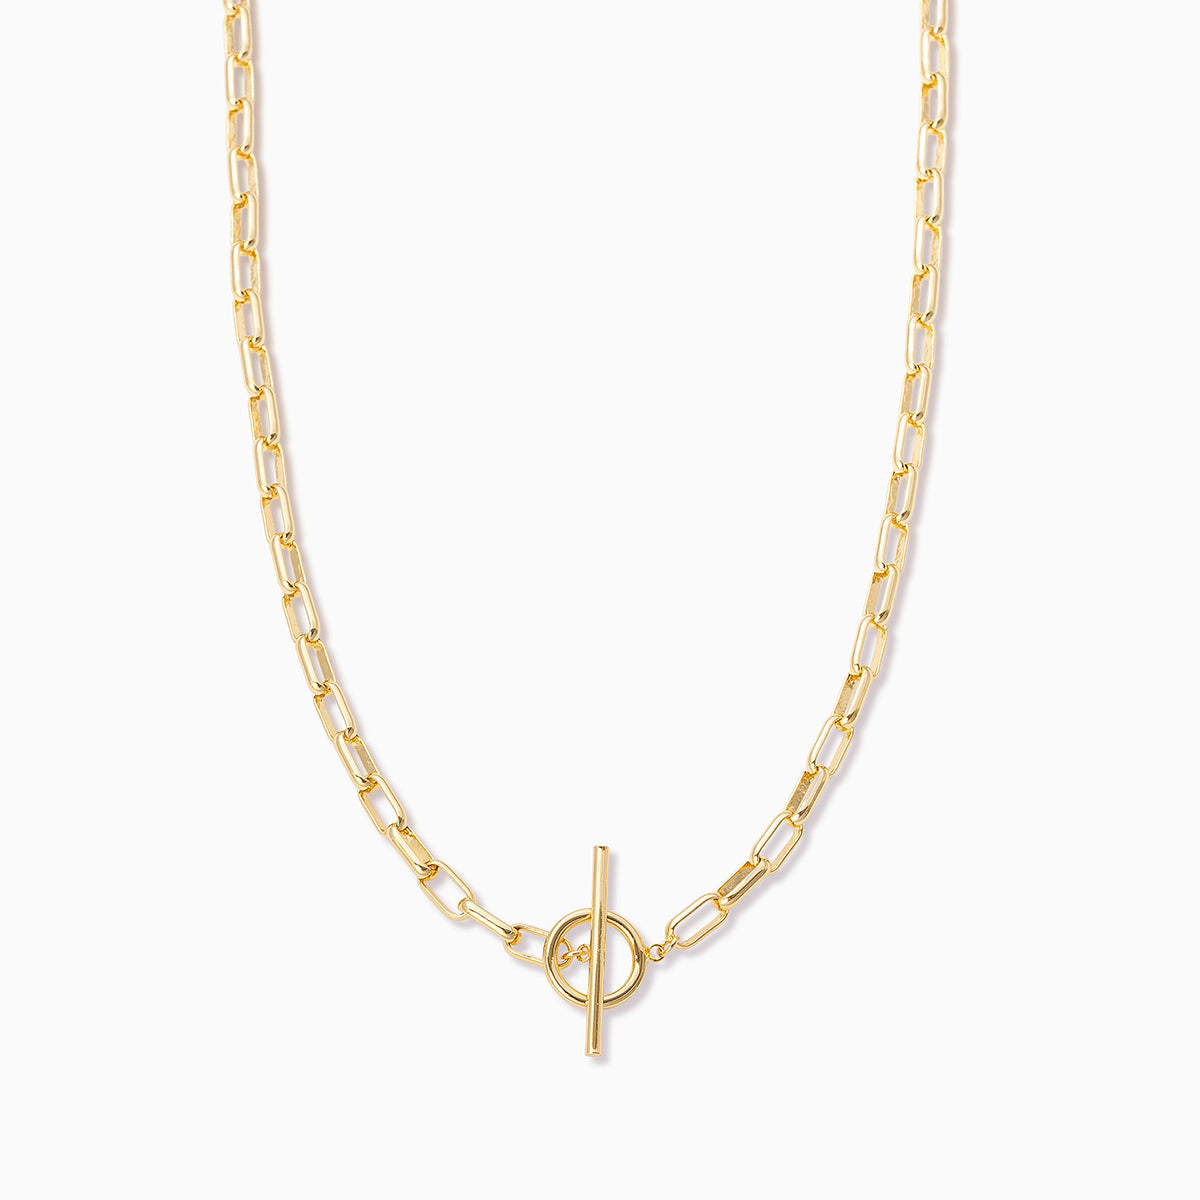 Staple Chain Necklace | Gold | Product Image | Uncommon James